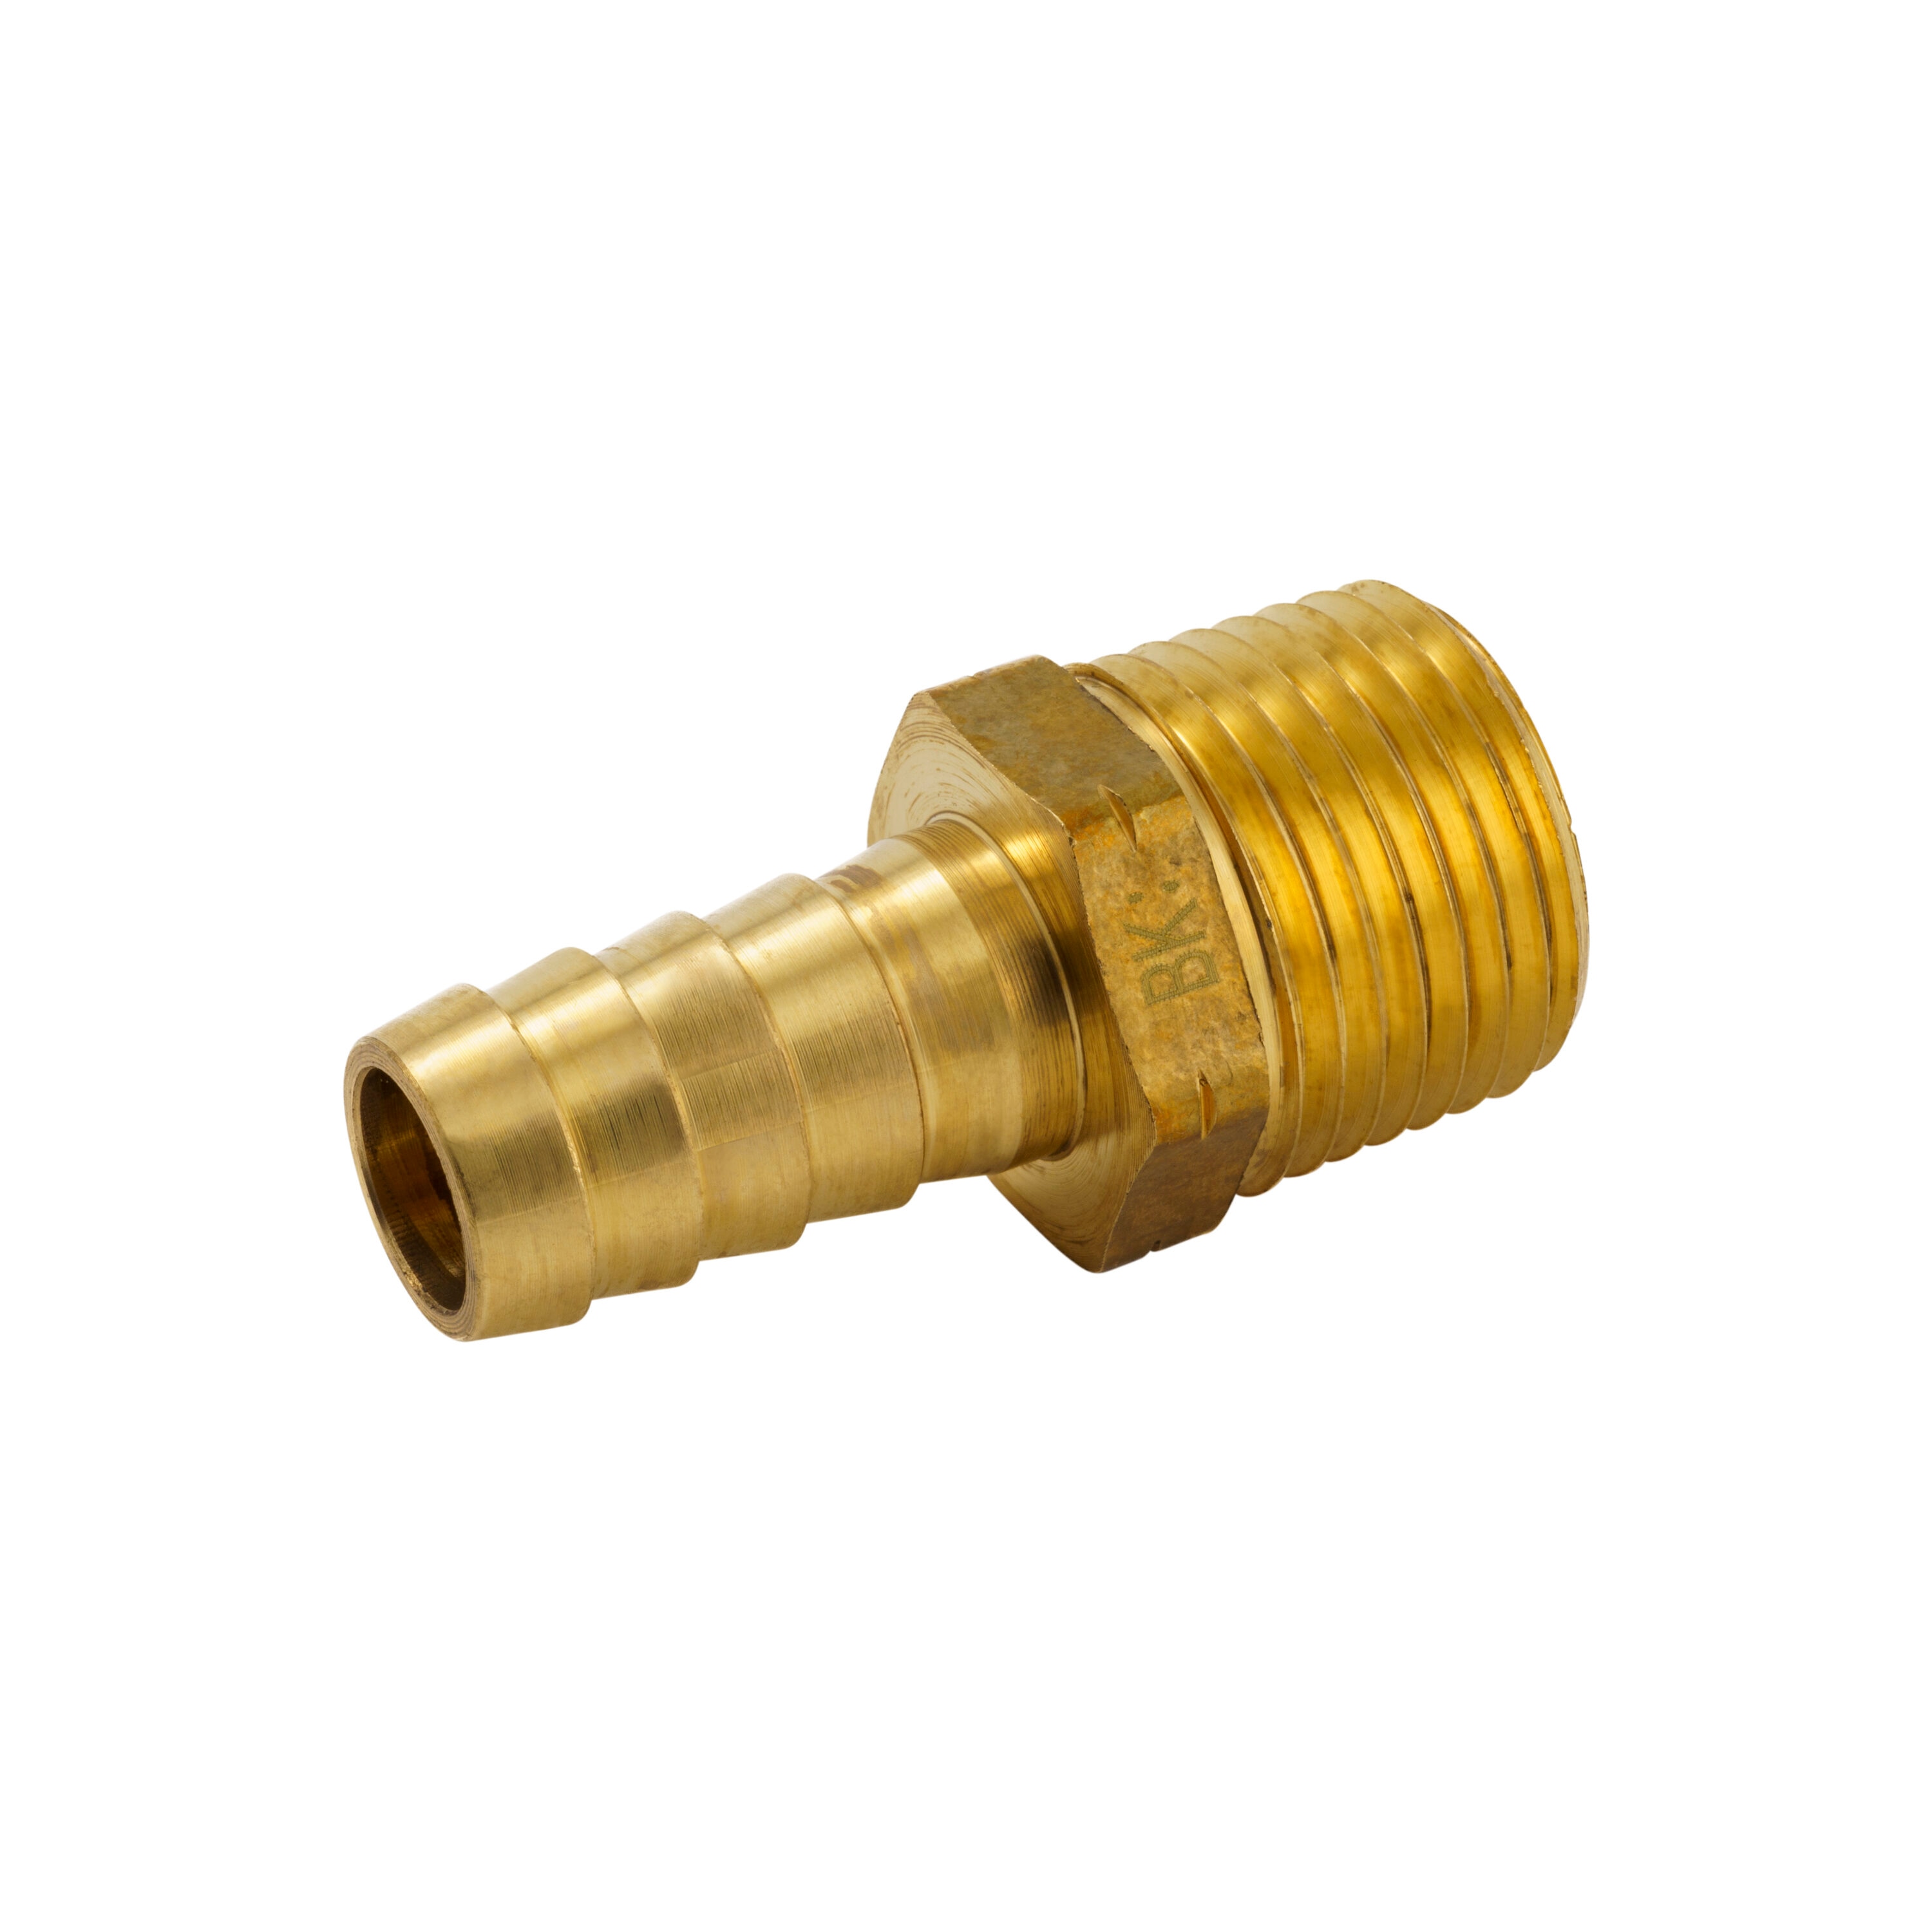 US Solid Brass Hose Fitting, Adapter, 1/2 Barb x 1/2 NPT Male Pipe  Fittings